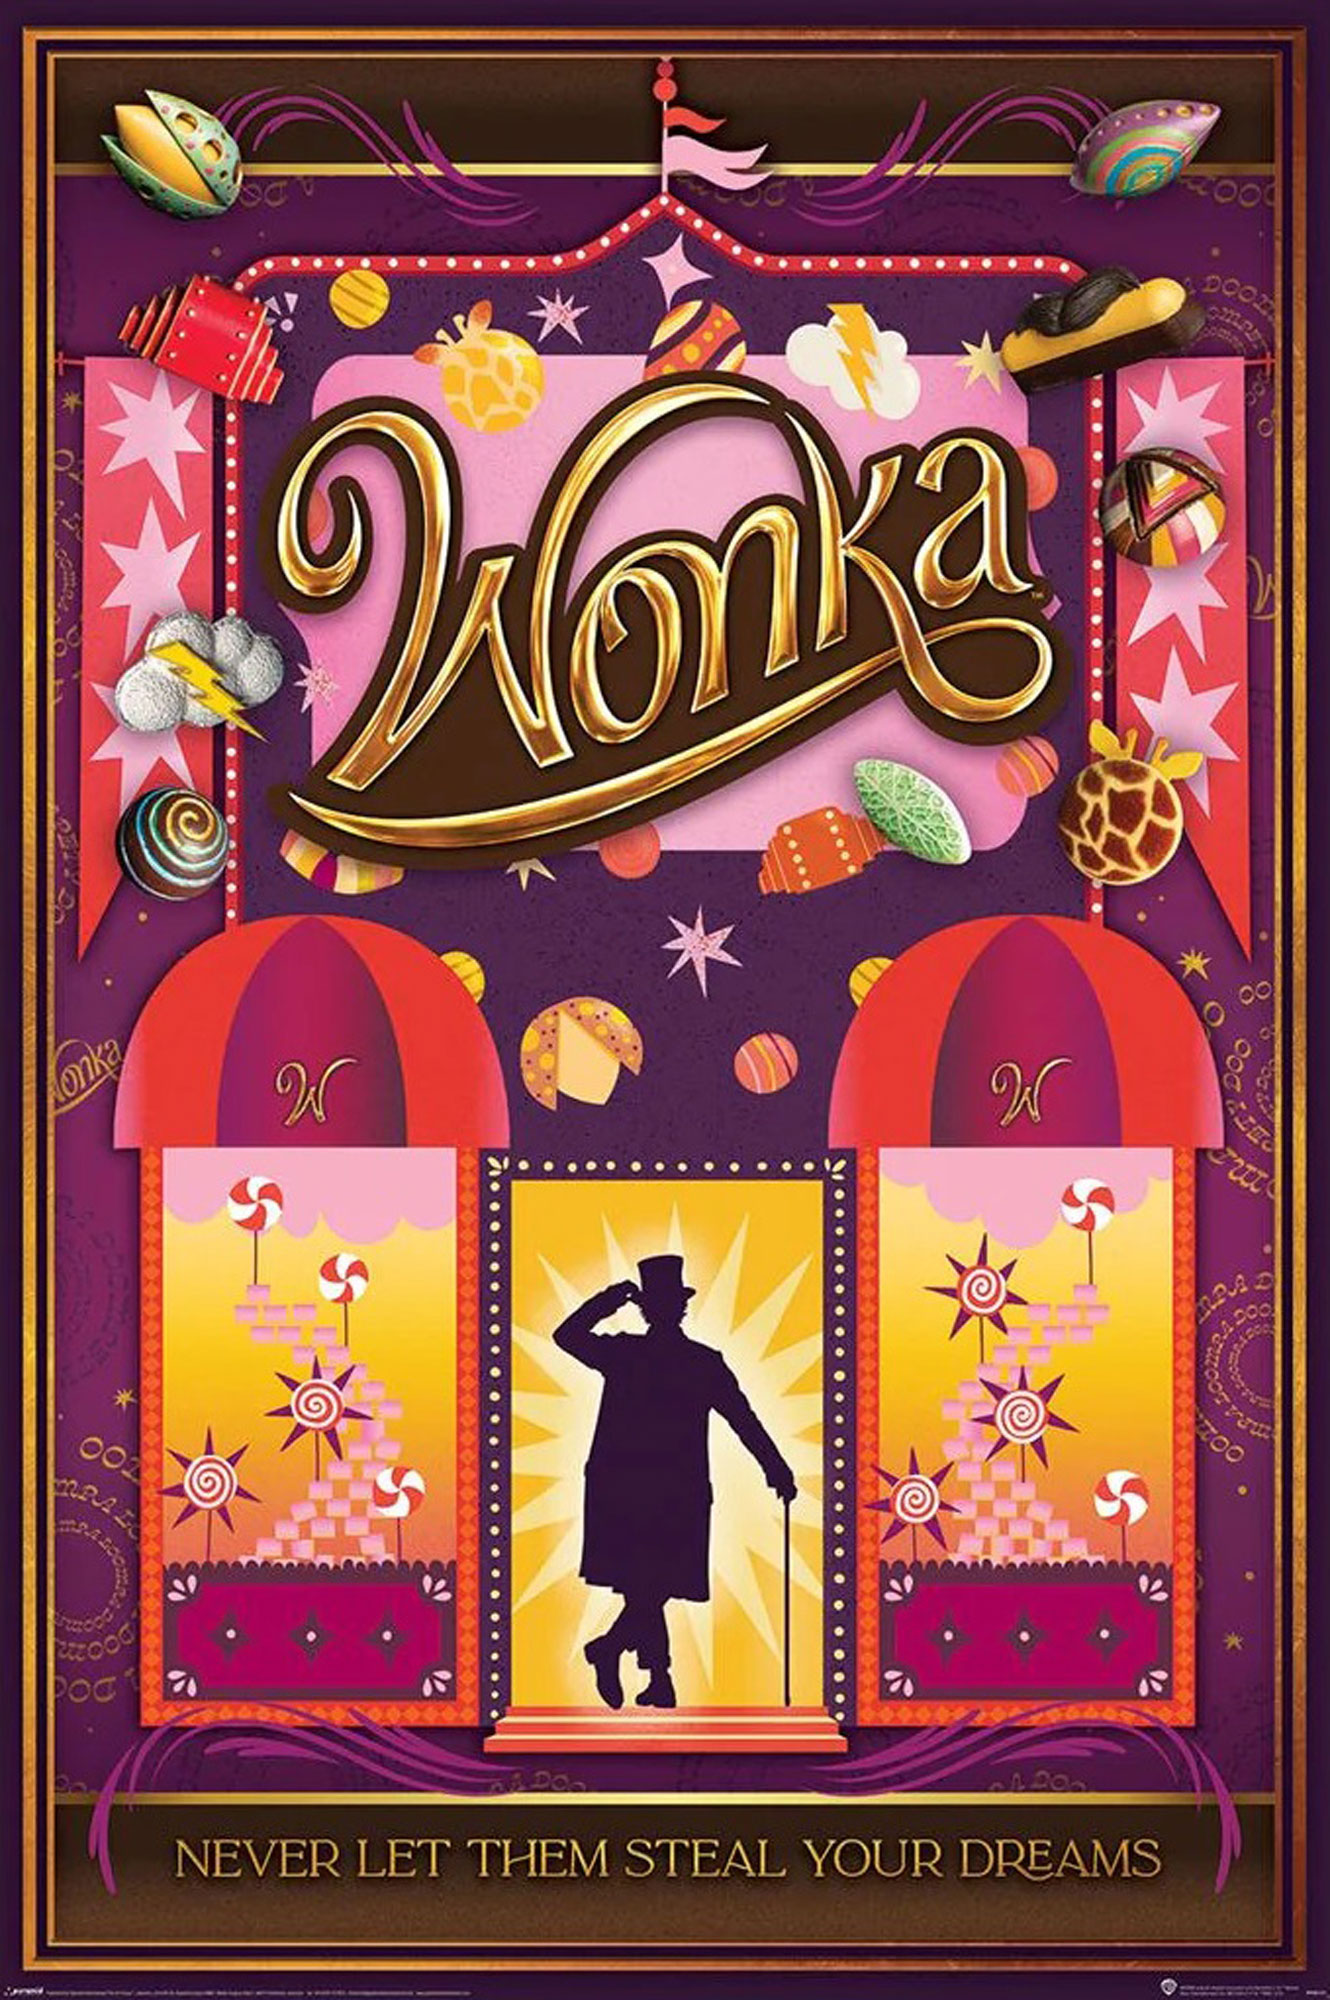 Wonka - them Never steal Dreams let your